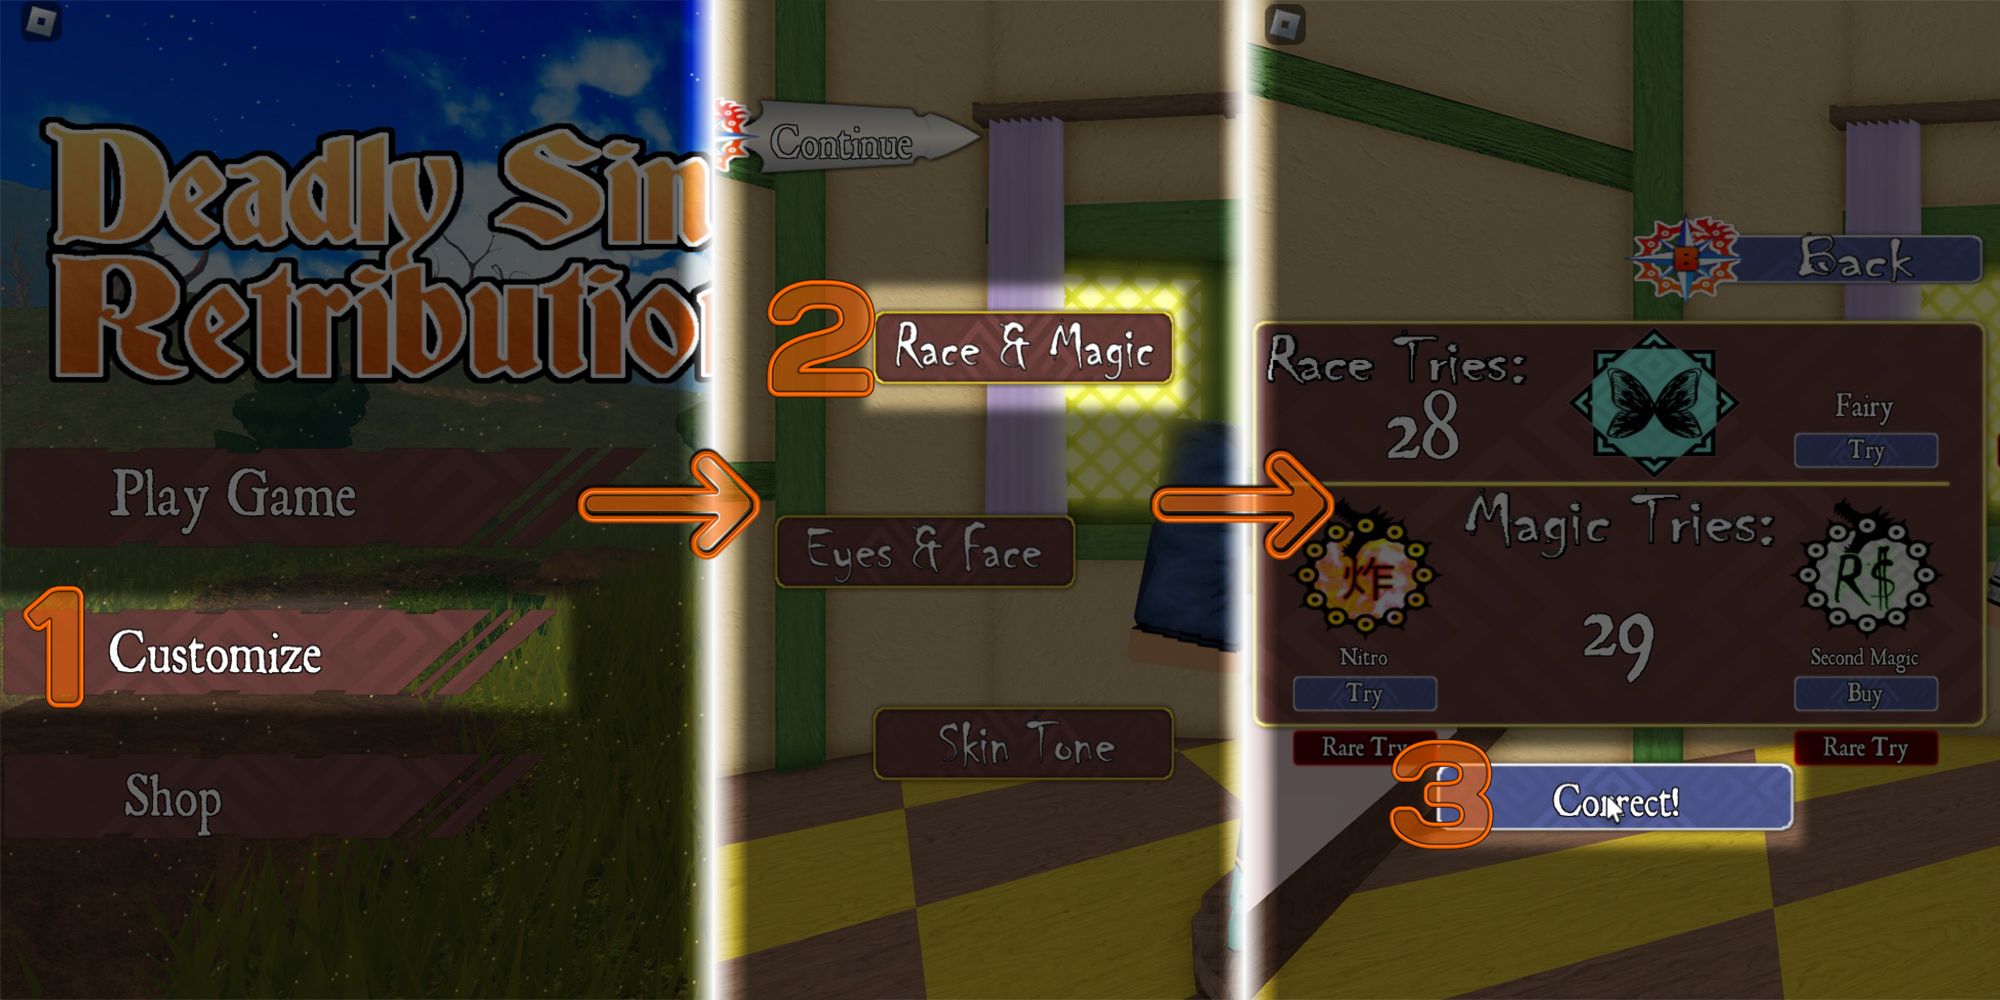 A step-by-step diagram of how to redeem codes for the Roblox game, Deadly Sins Retribution.